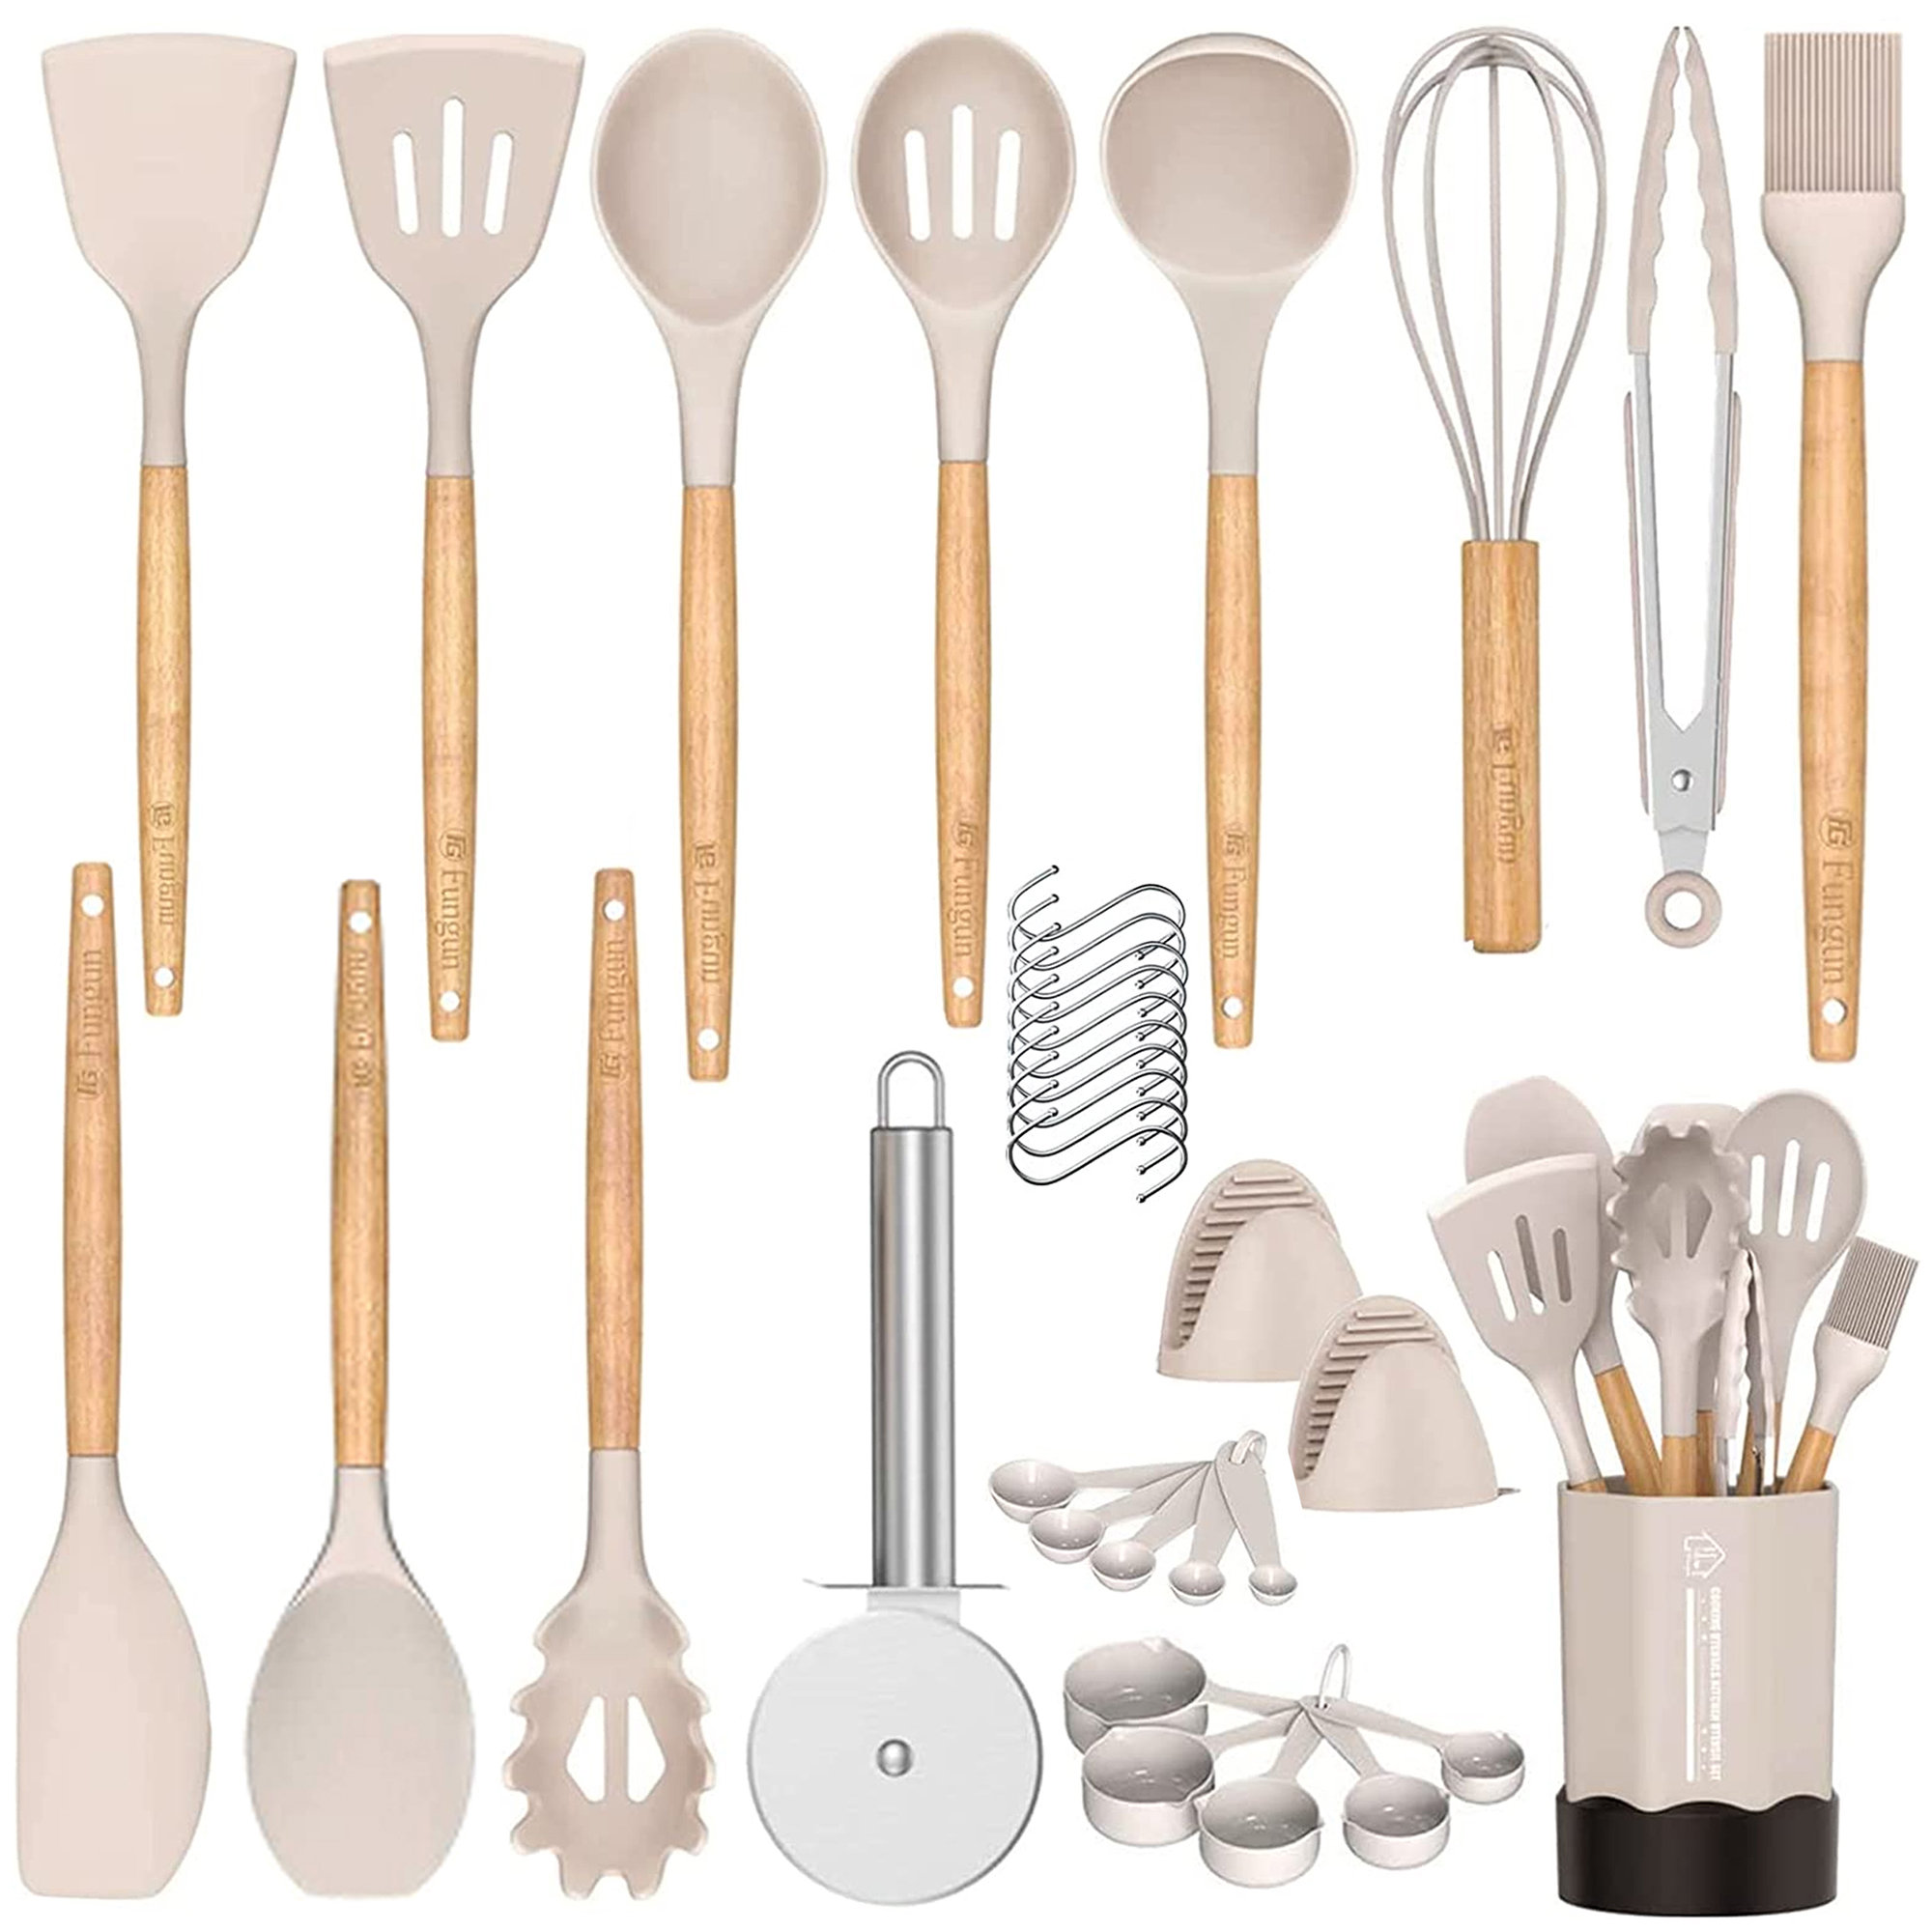 15 - Piece Cooking Spoon Set with Utensil Crock AIRPJ